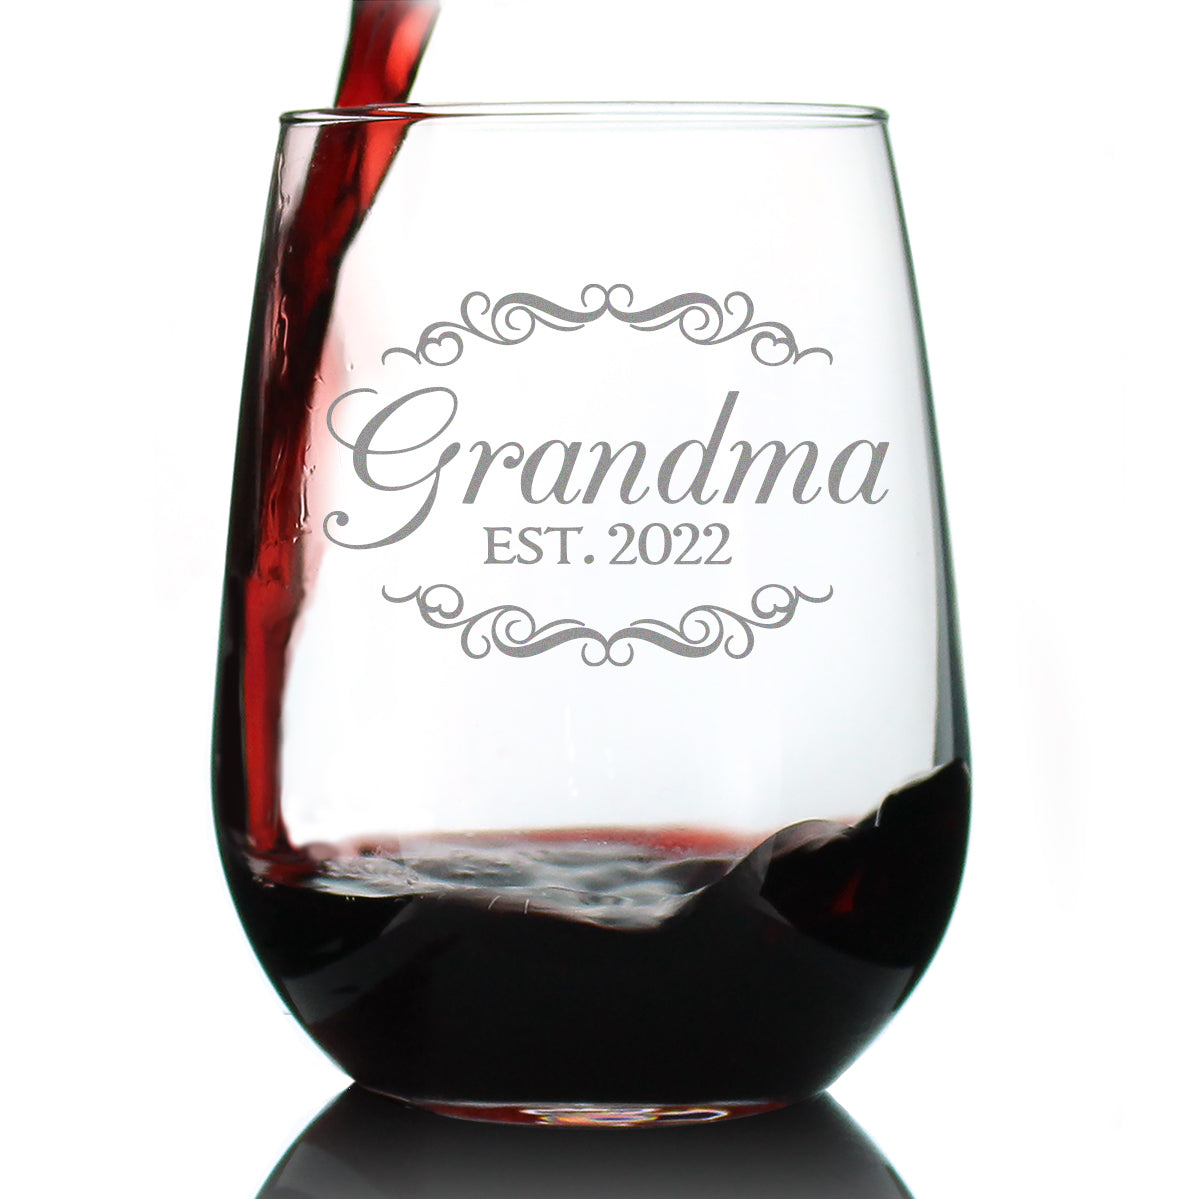 Grandma Est 2022 - New Grandmother Stemless Wine Glass Gift for First Time Grandparents - Decorative 17 Oz Large Glasses